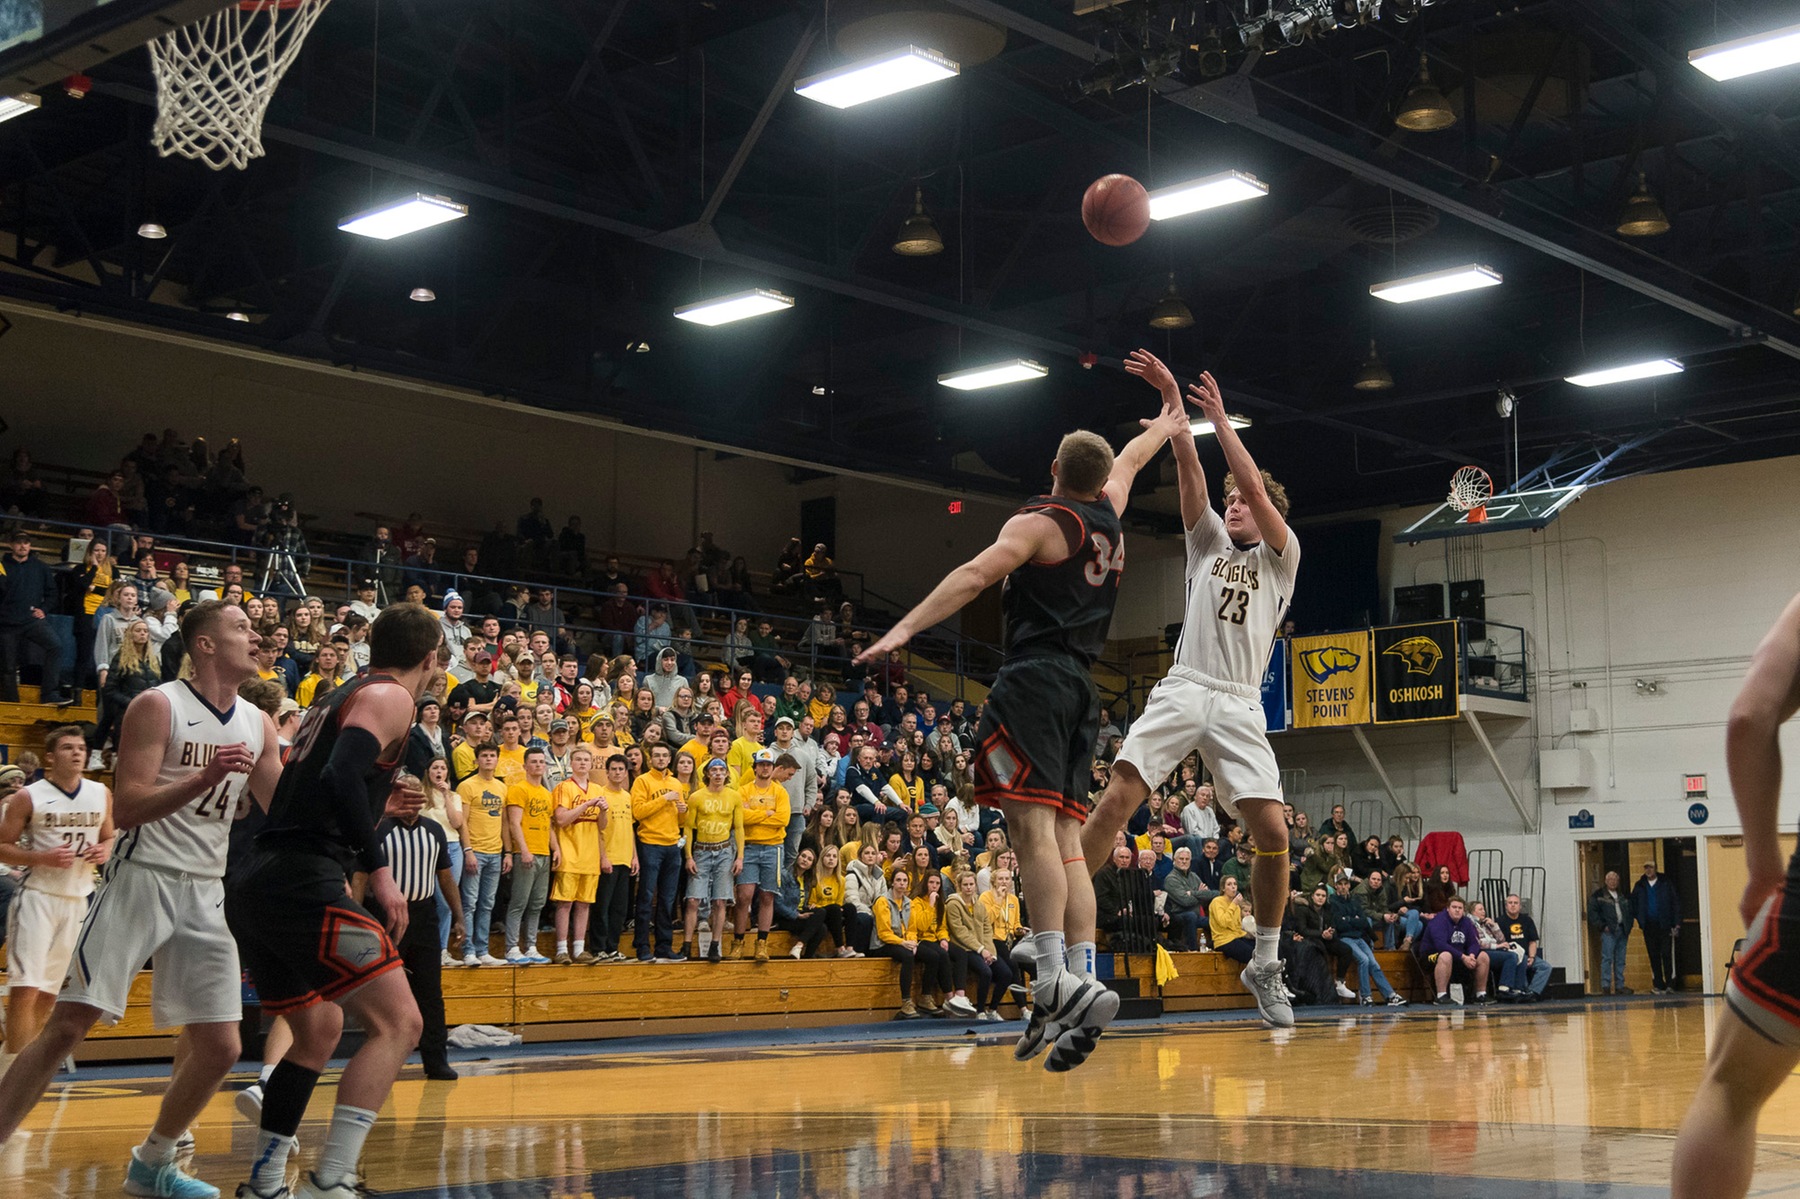 Photo by Connor Miller, UWEC Photo